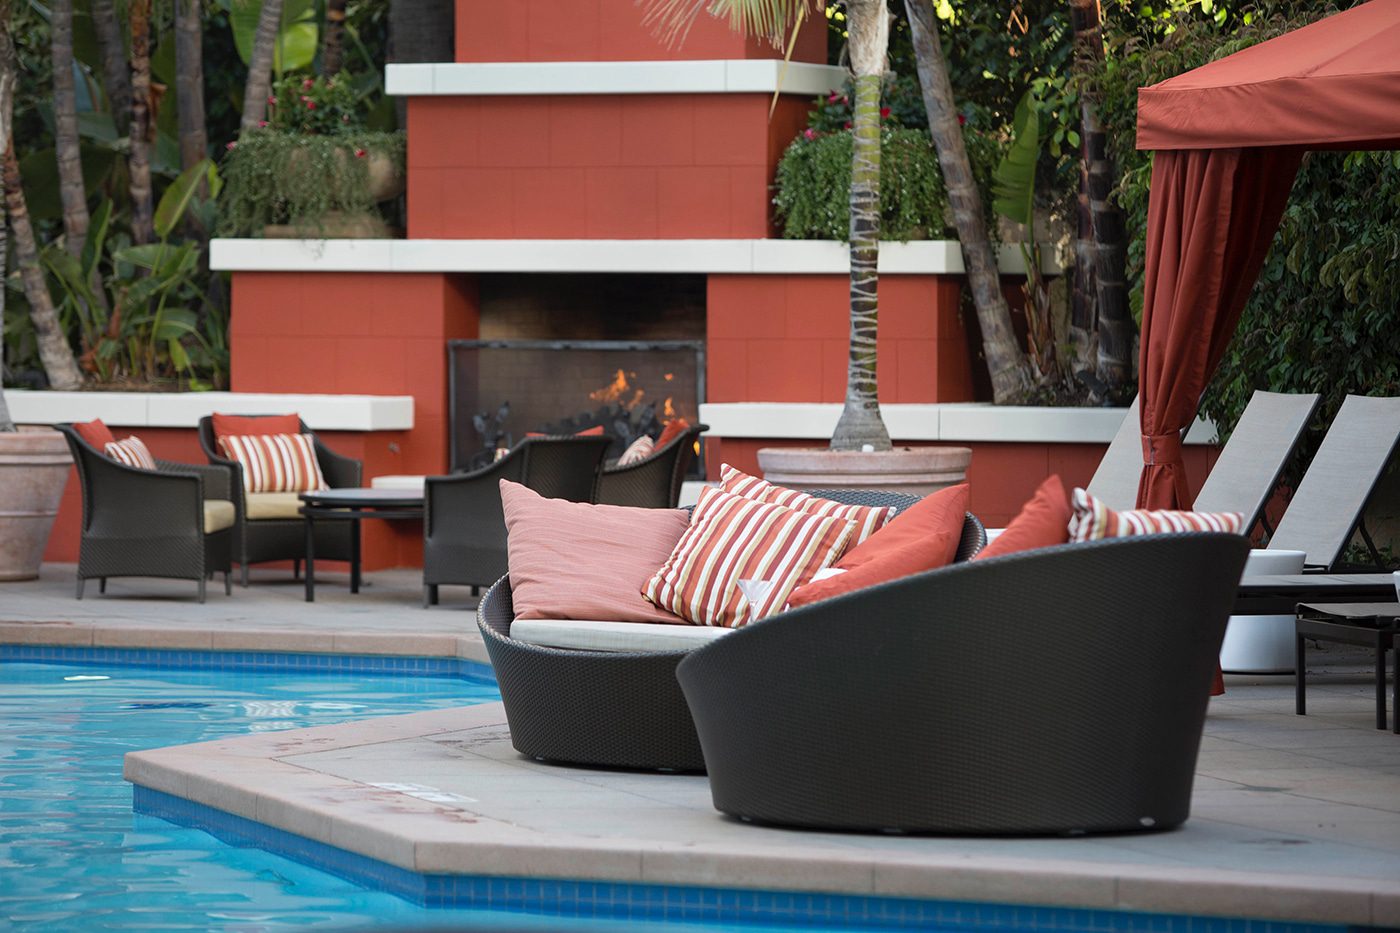 Relax in the heated pool